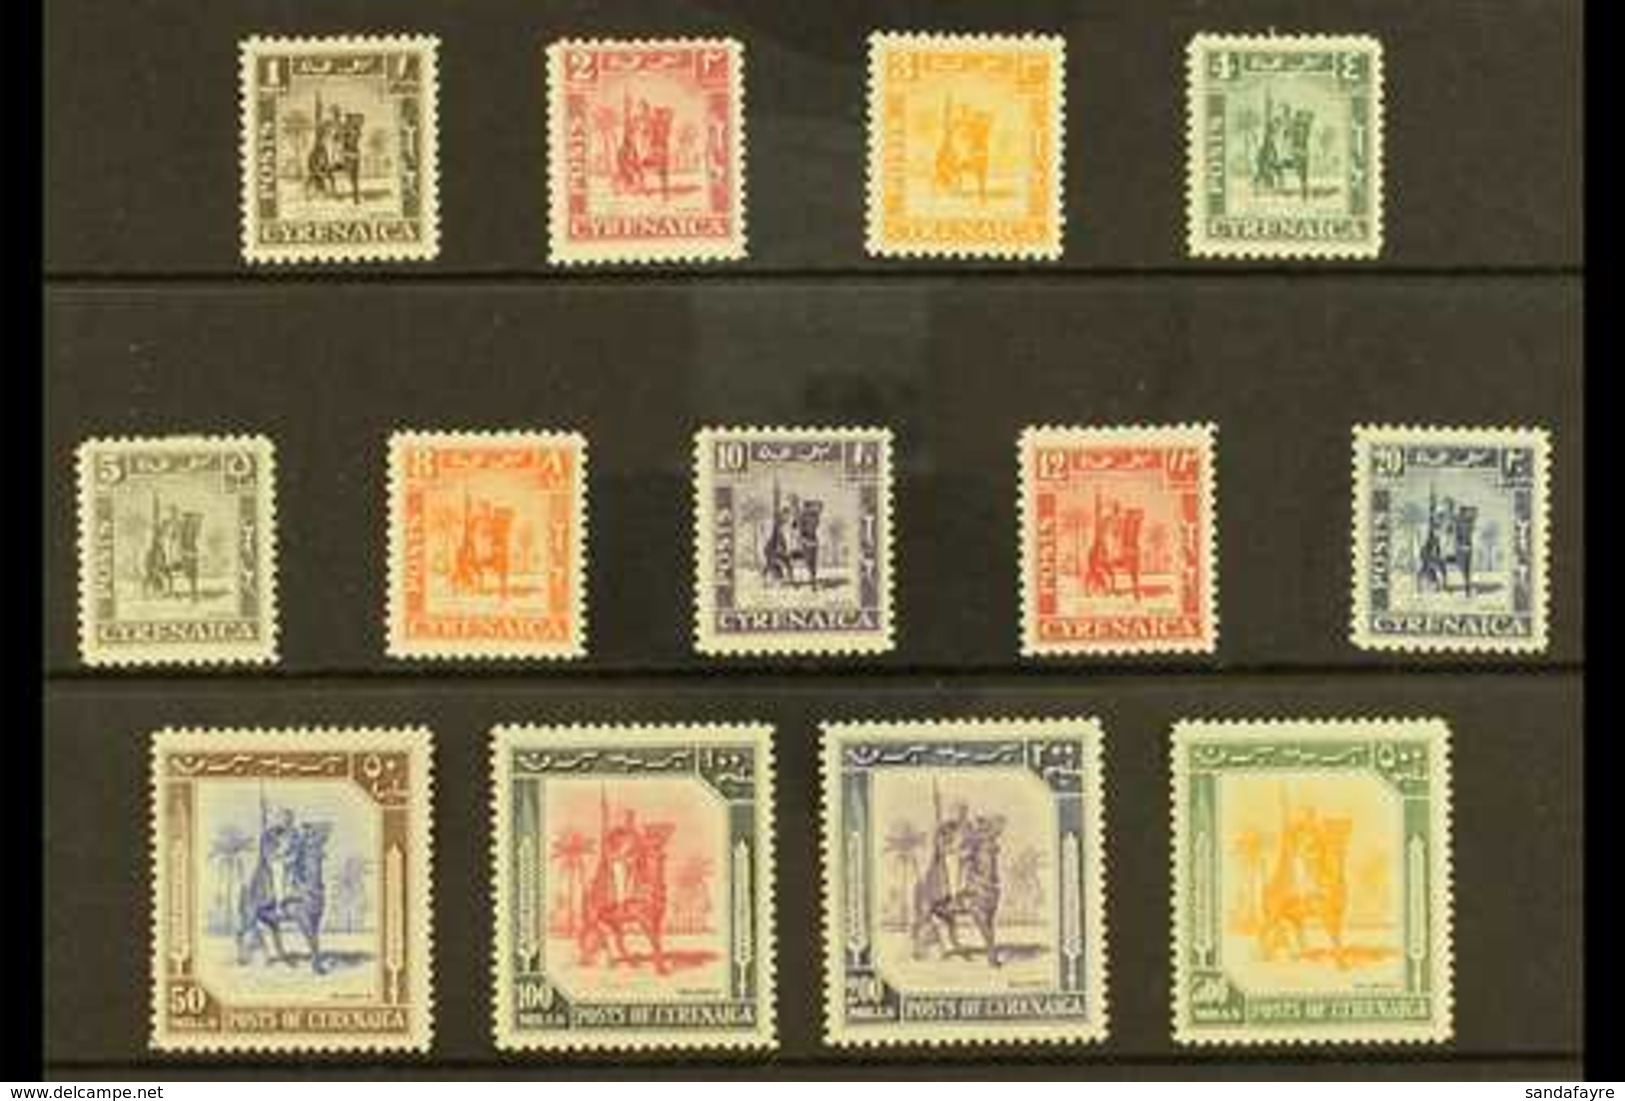 CYRENAICA 1950 "Mounted Warrior" Complete Definitive Set, SG 136/148, Very Fine Mint. (13 Stamps) For More Images, Pleas - Italiaans Oost-Afrika